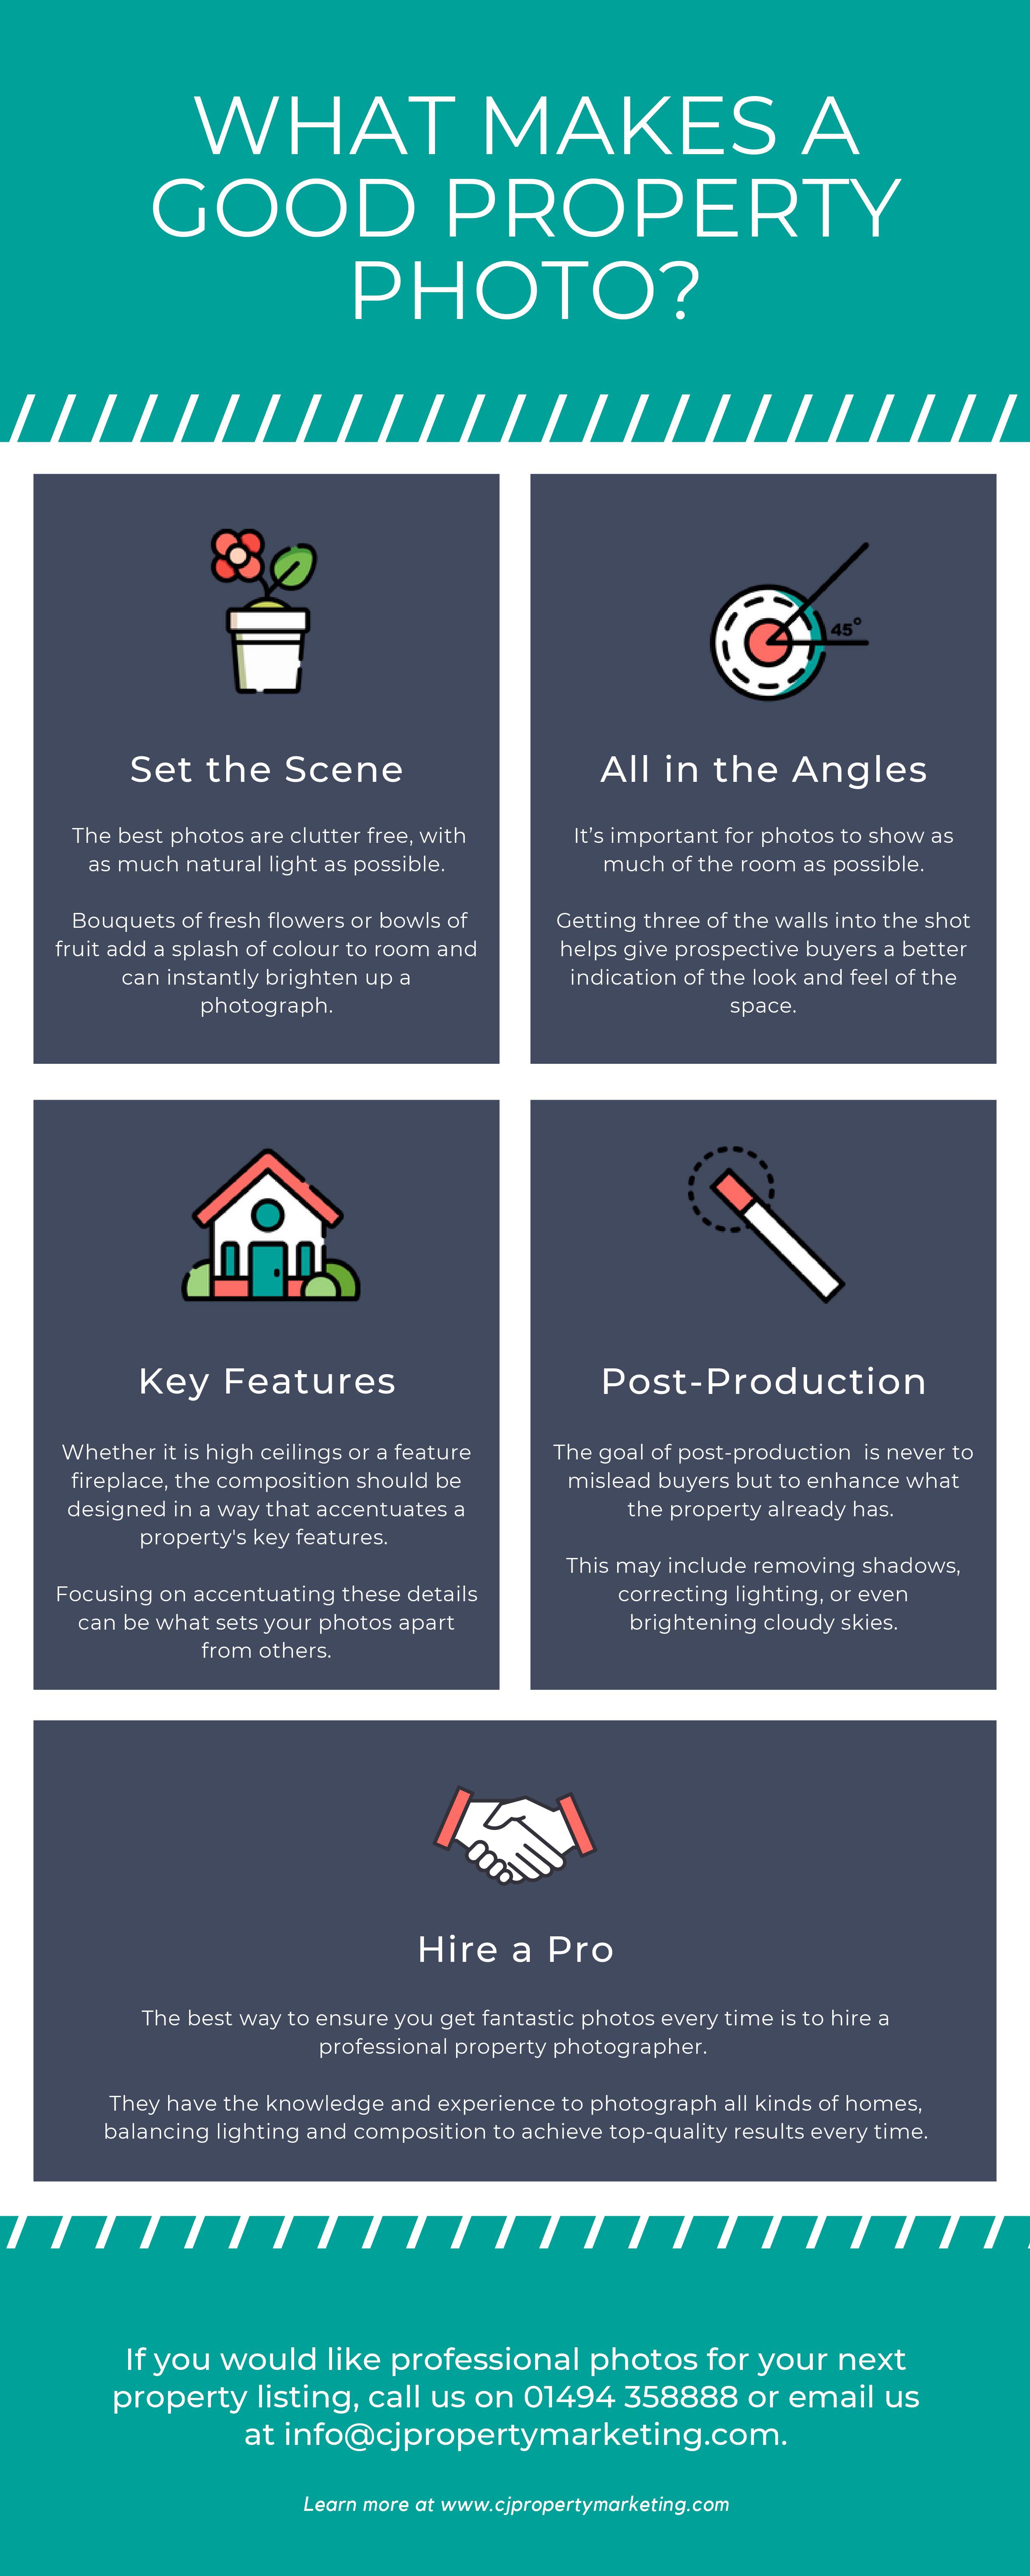 Content marketing for estate agents: An infographic about what makes a good property photo, illustrating a way to reuse content.